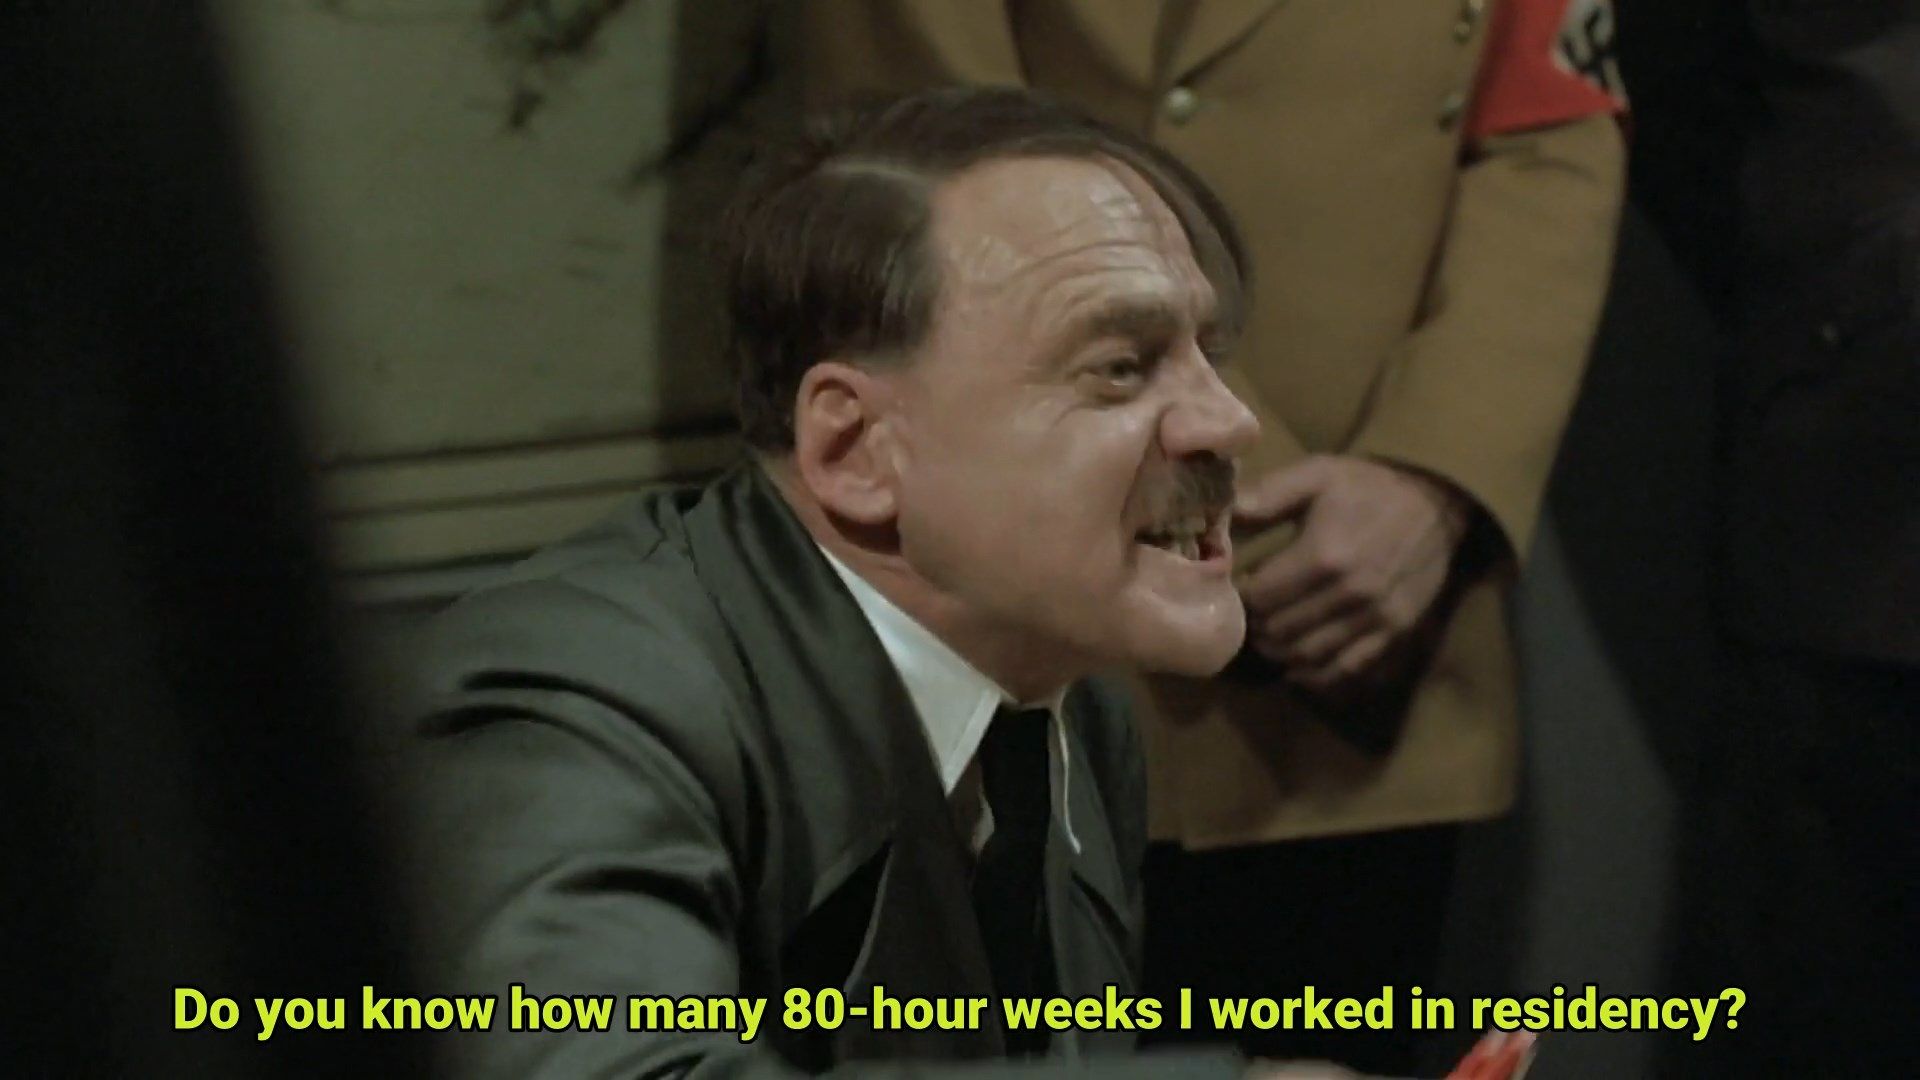 Hitler finds out about Full Practice Authority